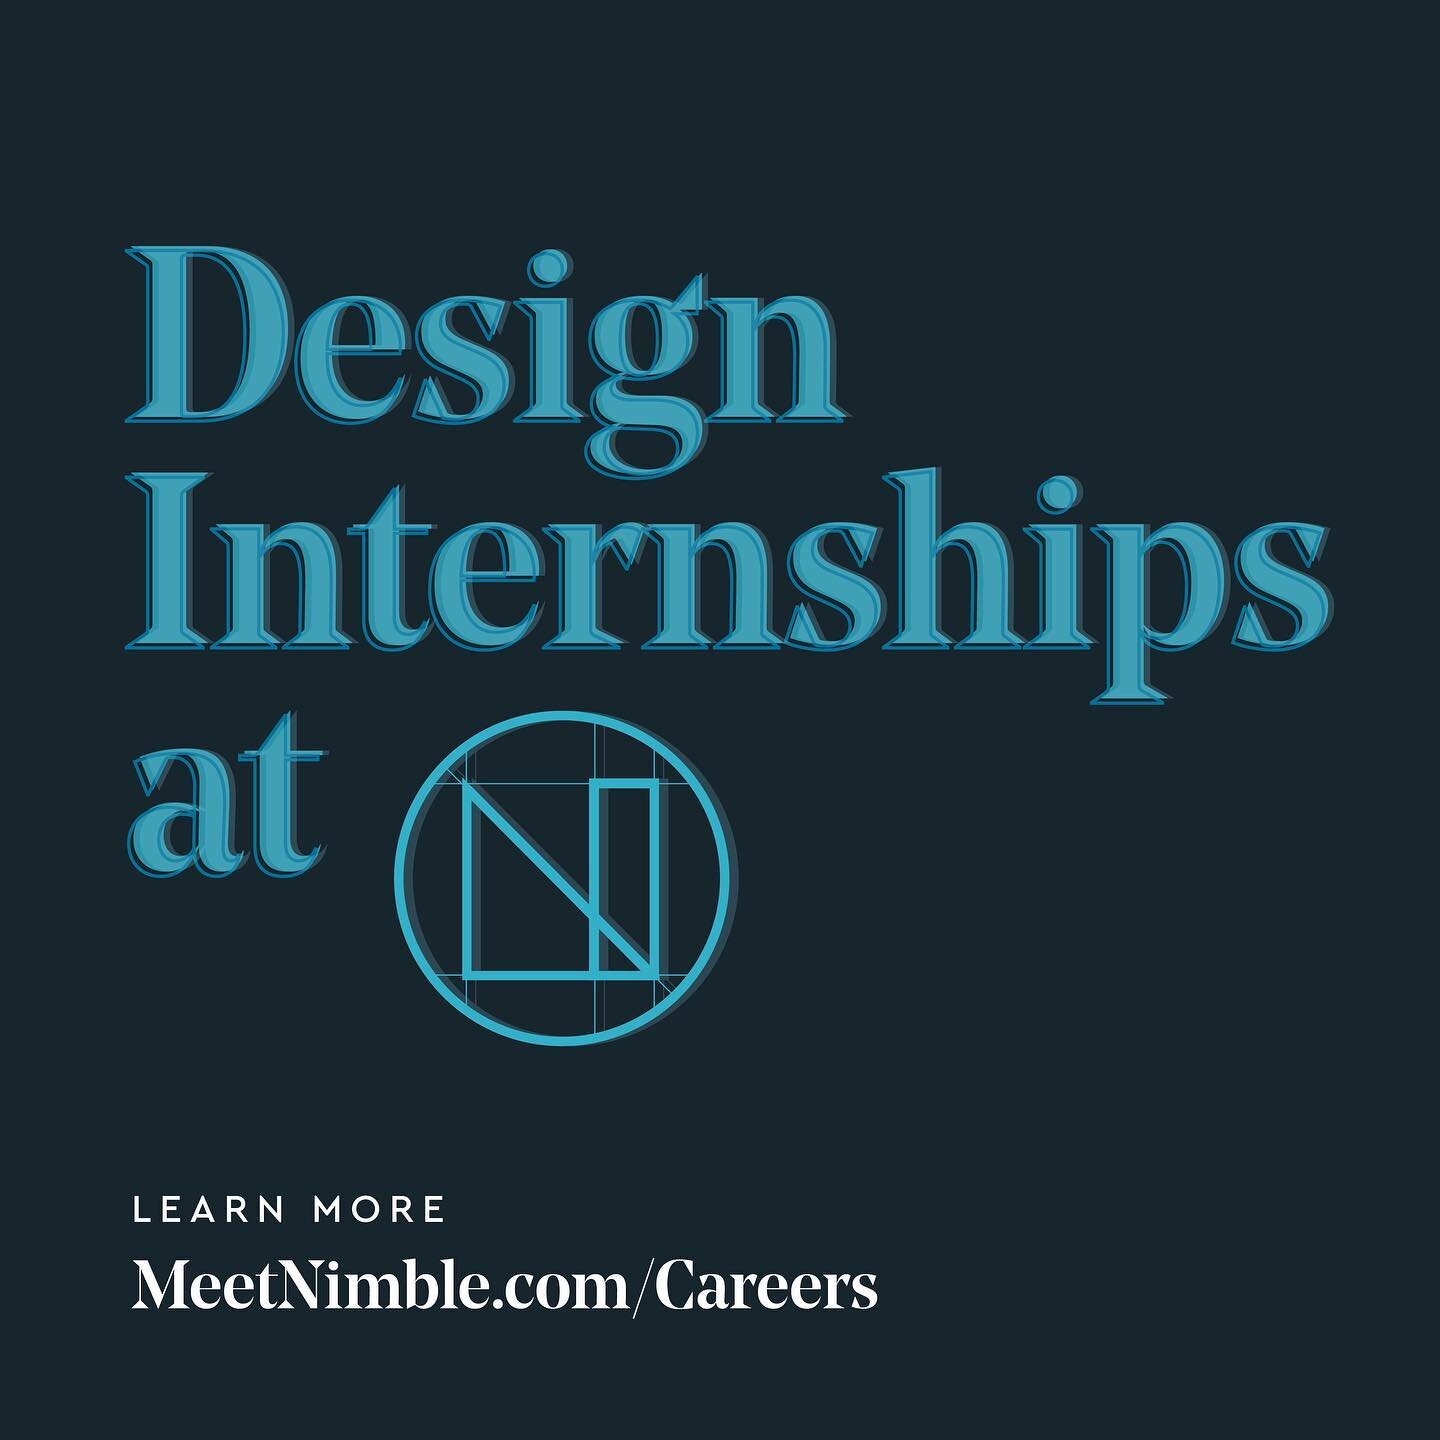 Calling all undergraduate design program juniors and seniors!

We are on the hunt for stellar Design Interns to join us two (2) days per week in-studio (located in Historic Marietta, off the Square) for 10 hours per week to design alongside our team 